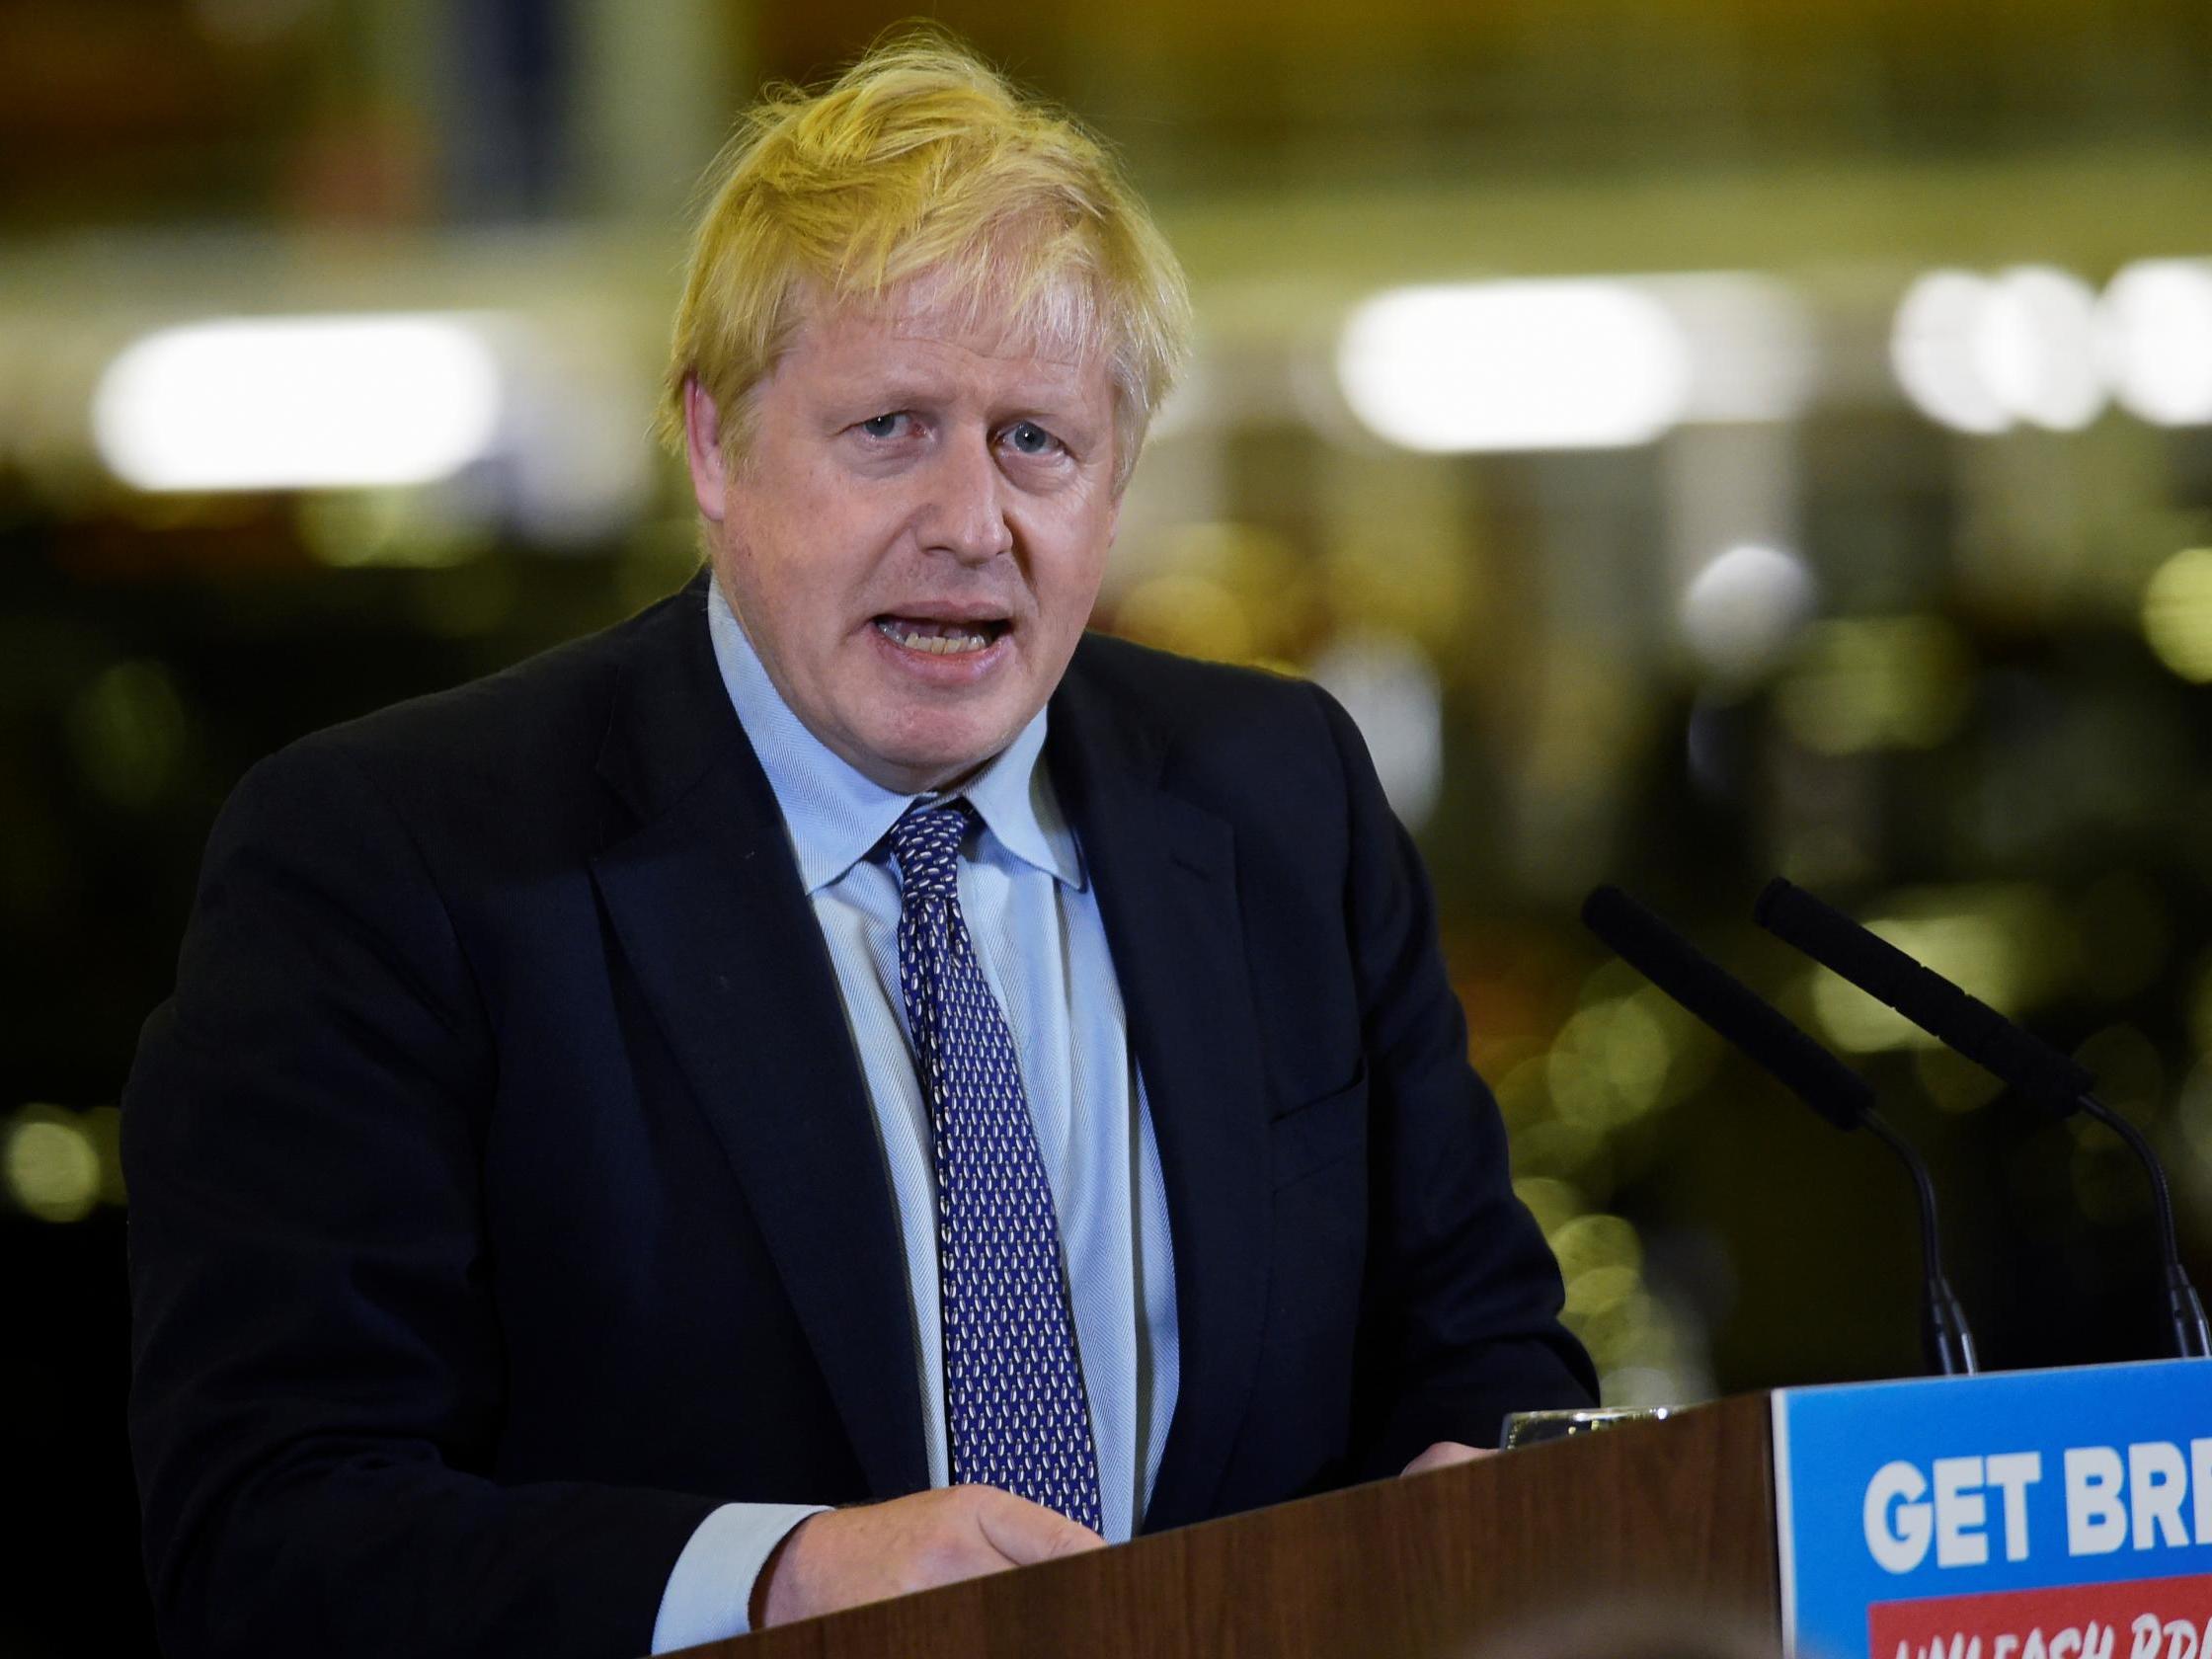 General election: Johnson seeks to capitalise on confusion over Labour stance on Scottish referendum